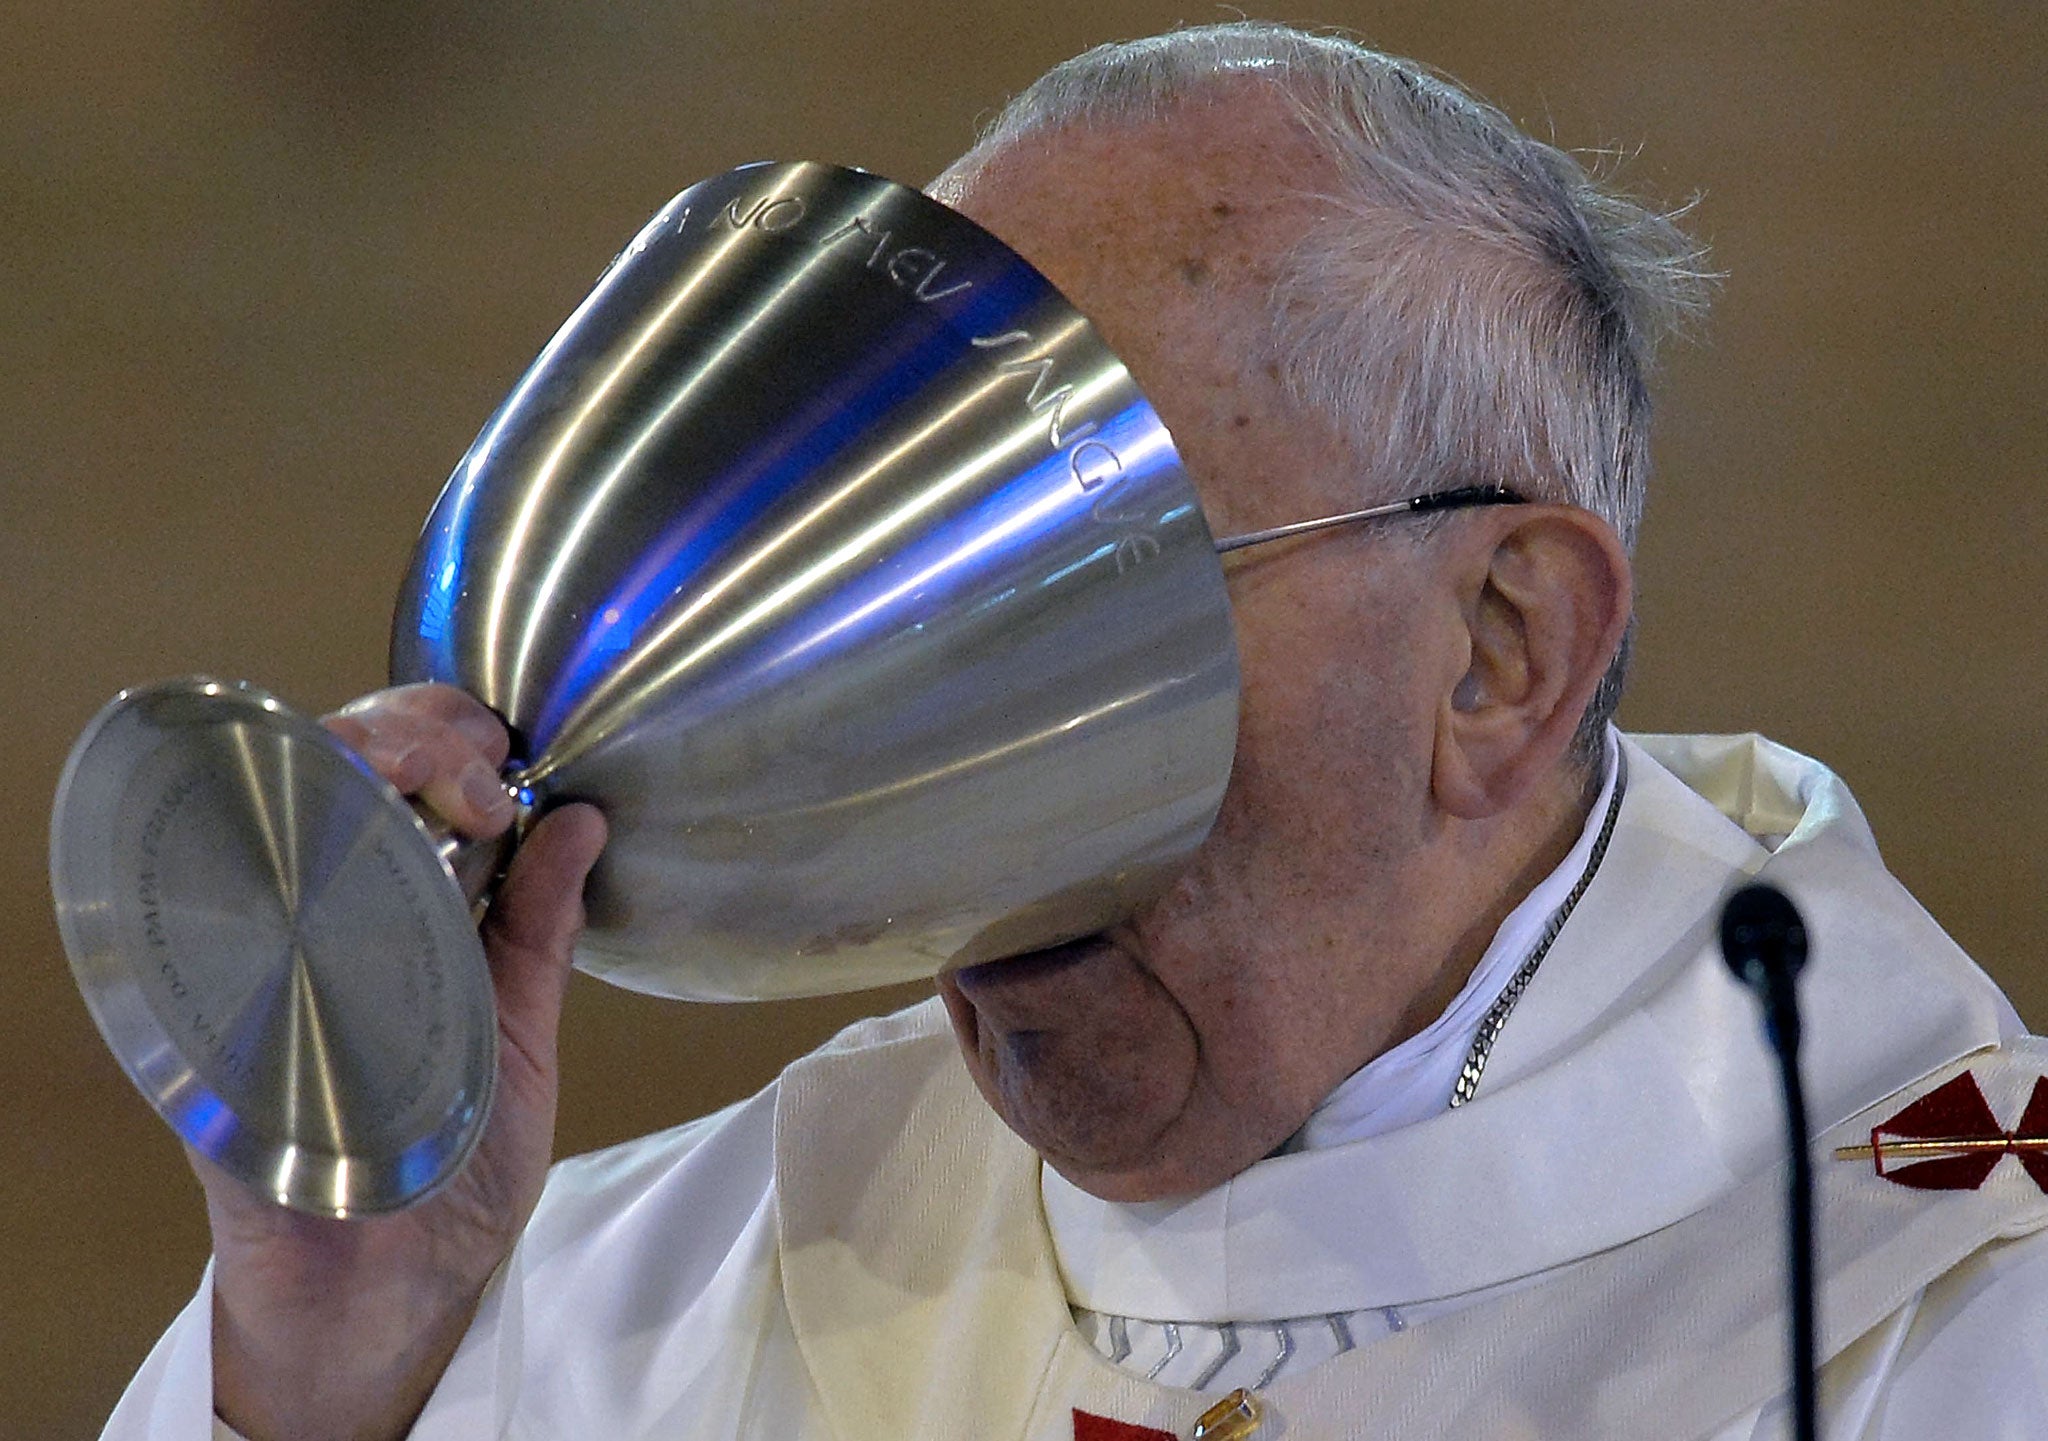 The Vatican City consumes more wine per capita over the course of a year than any other country, new figures have shown